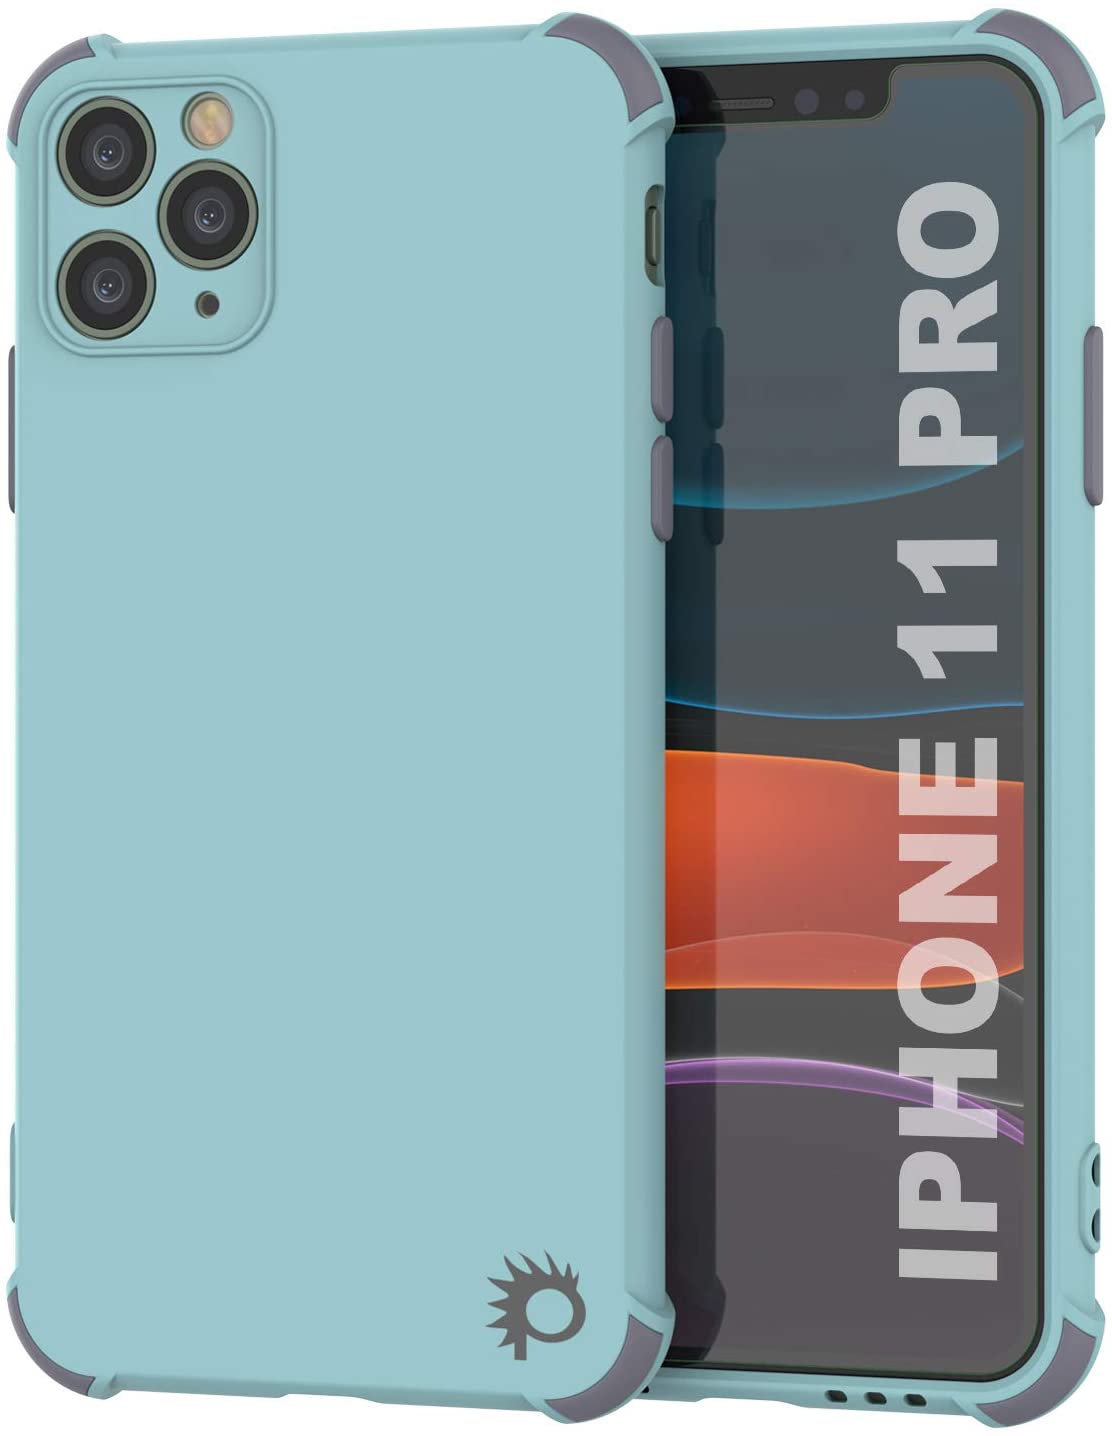 Punkcase Protective & Lightweight TPU Case [Sunshine Series] for iPhone 11 Pro [Teal]